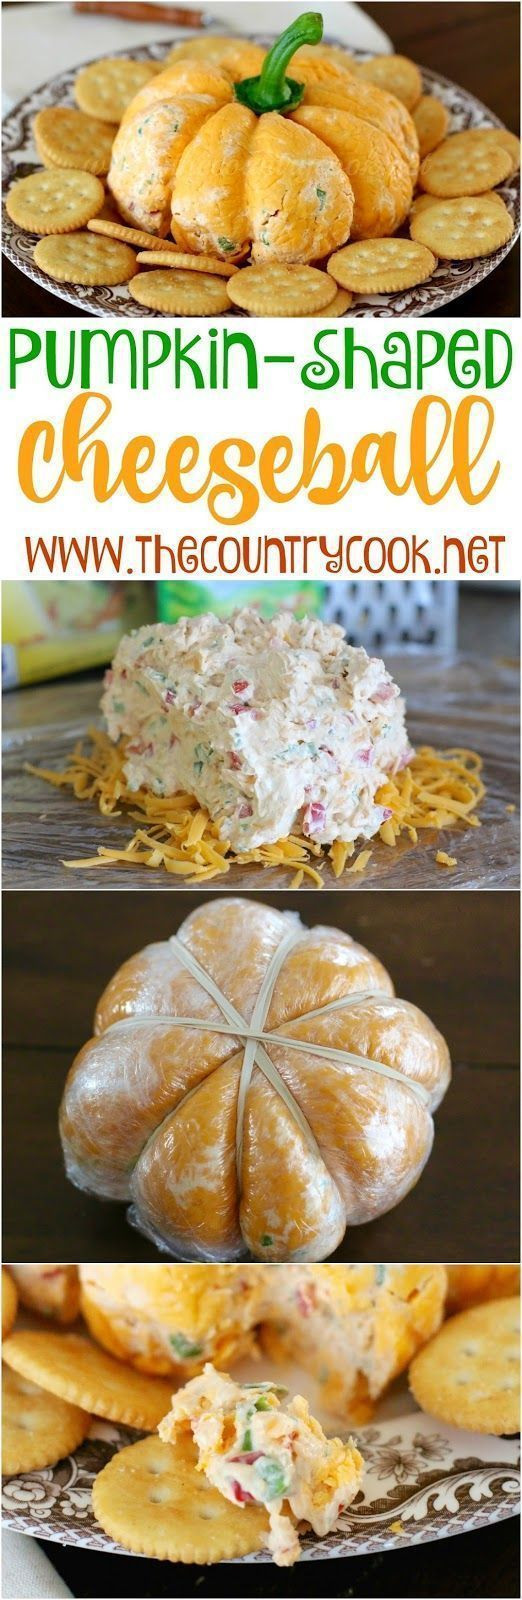 Traditional Thanksgiving Appetizers
 Best 25 Turkey cheese ball ideas on Pinterest